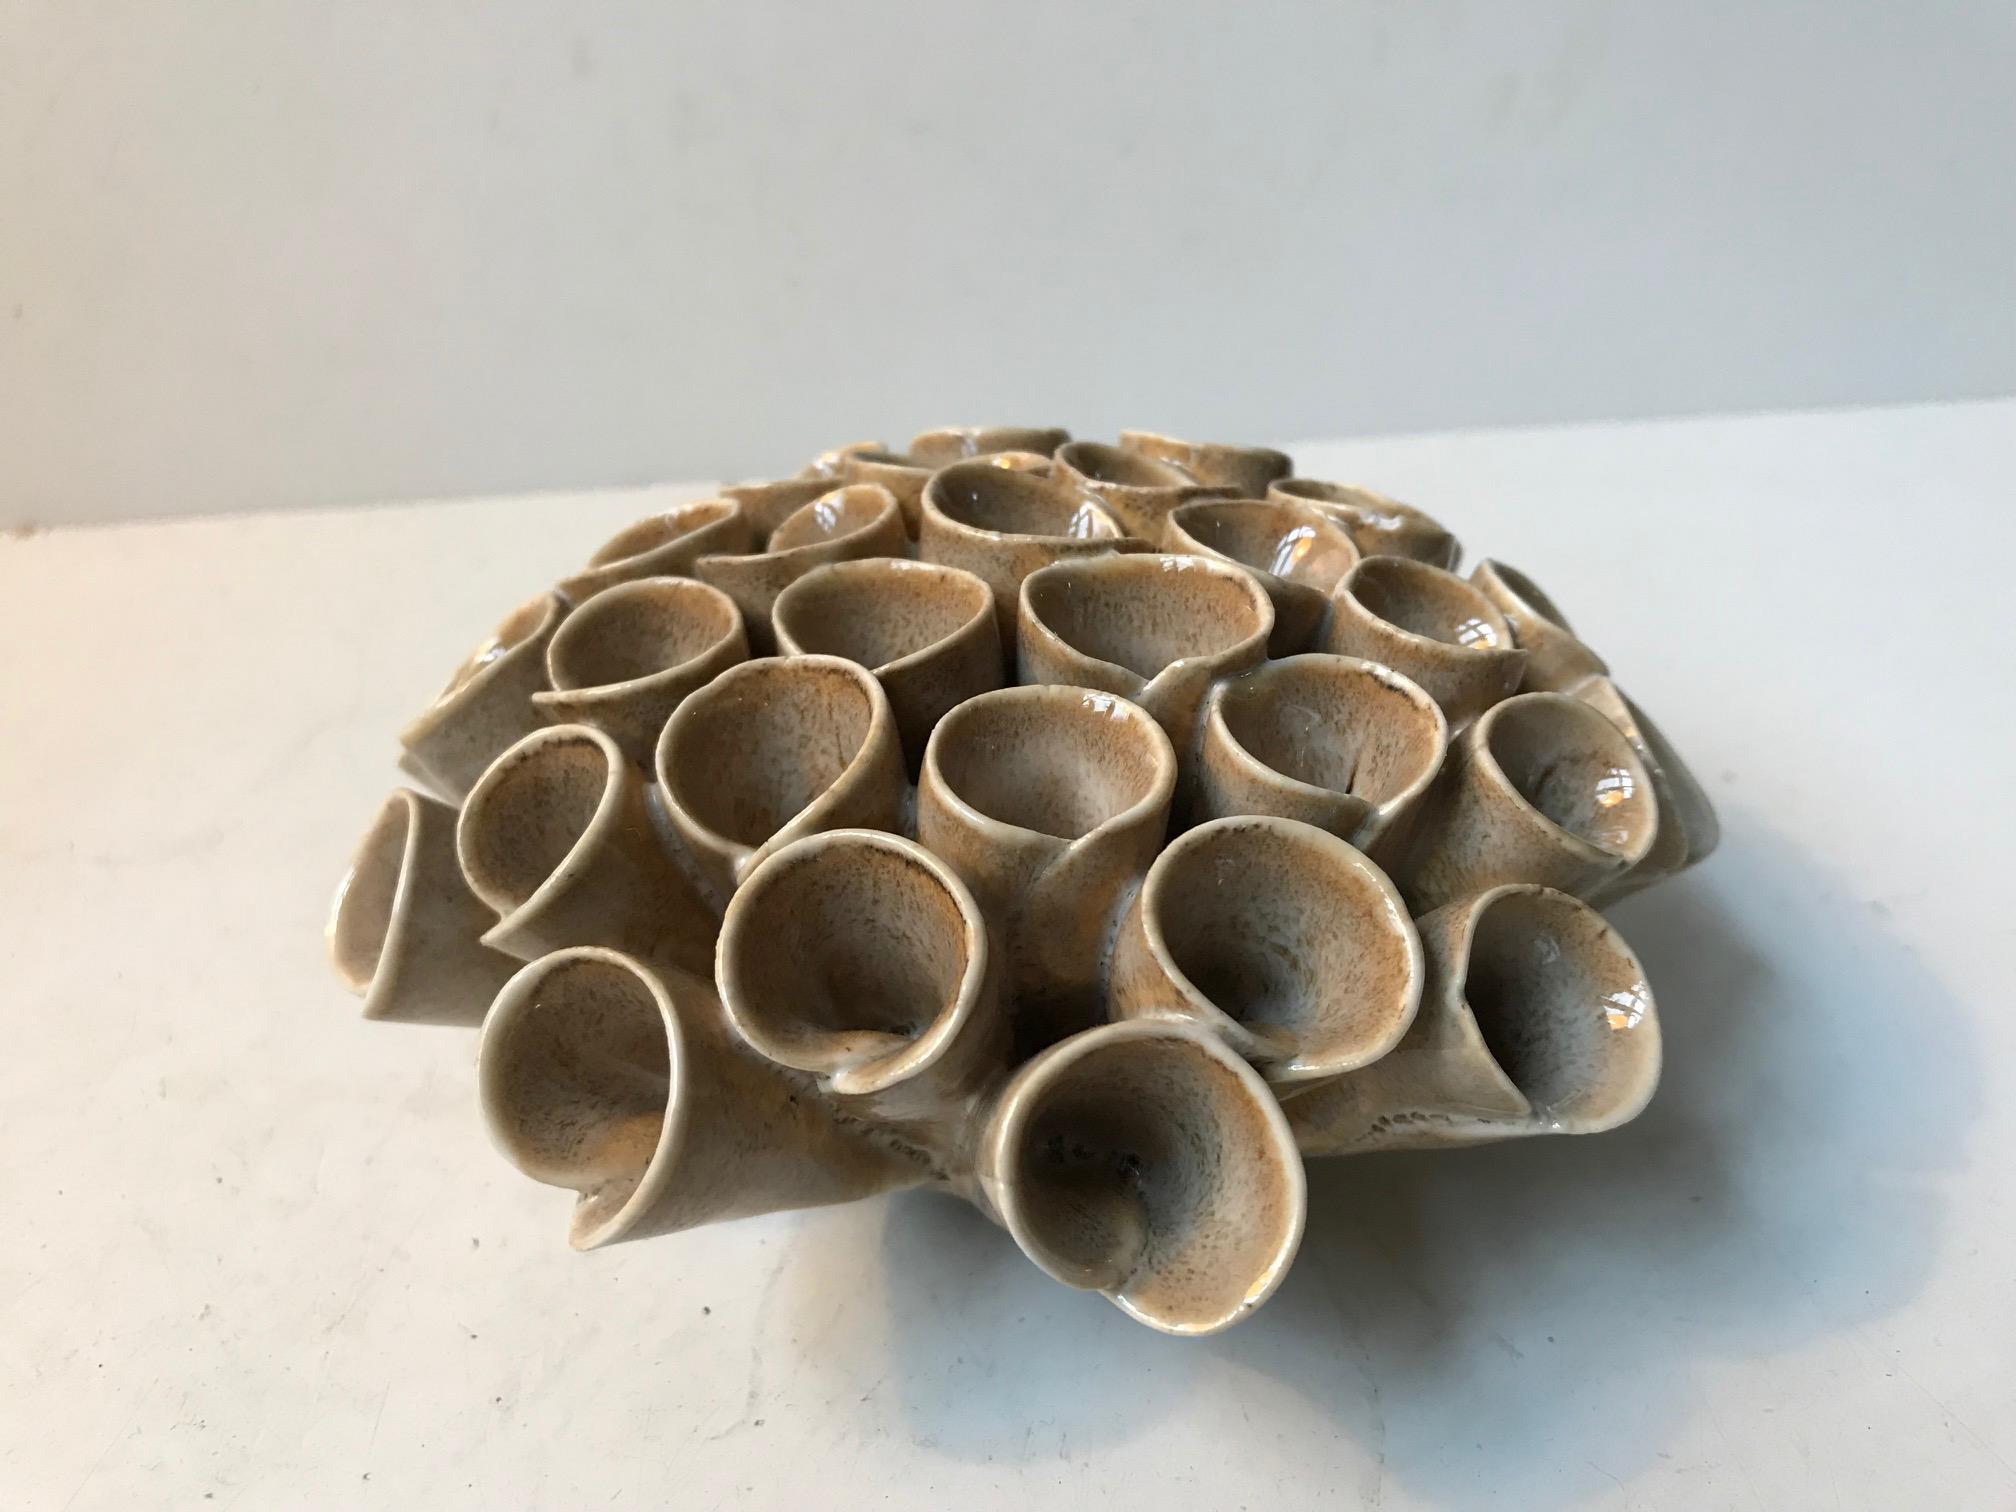 Late 20th Century Coral Shaped Ceramic Vase by Anonymous Danish Ceramist, 1980s